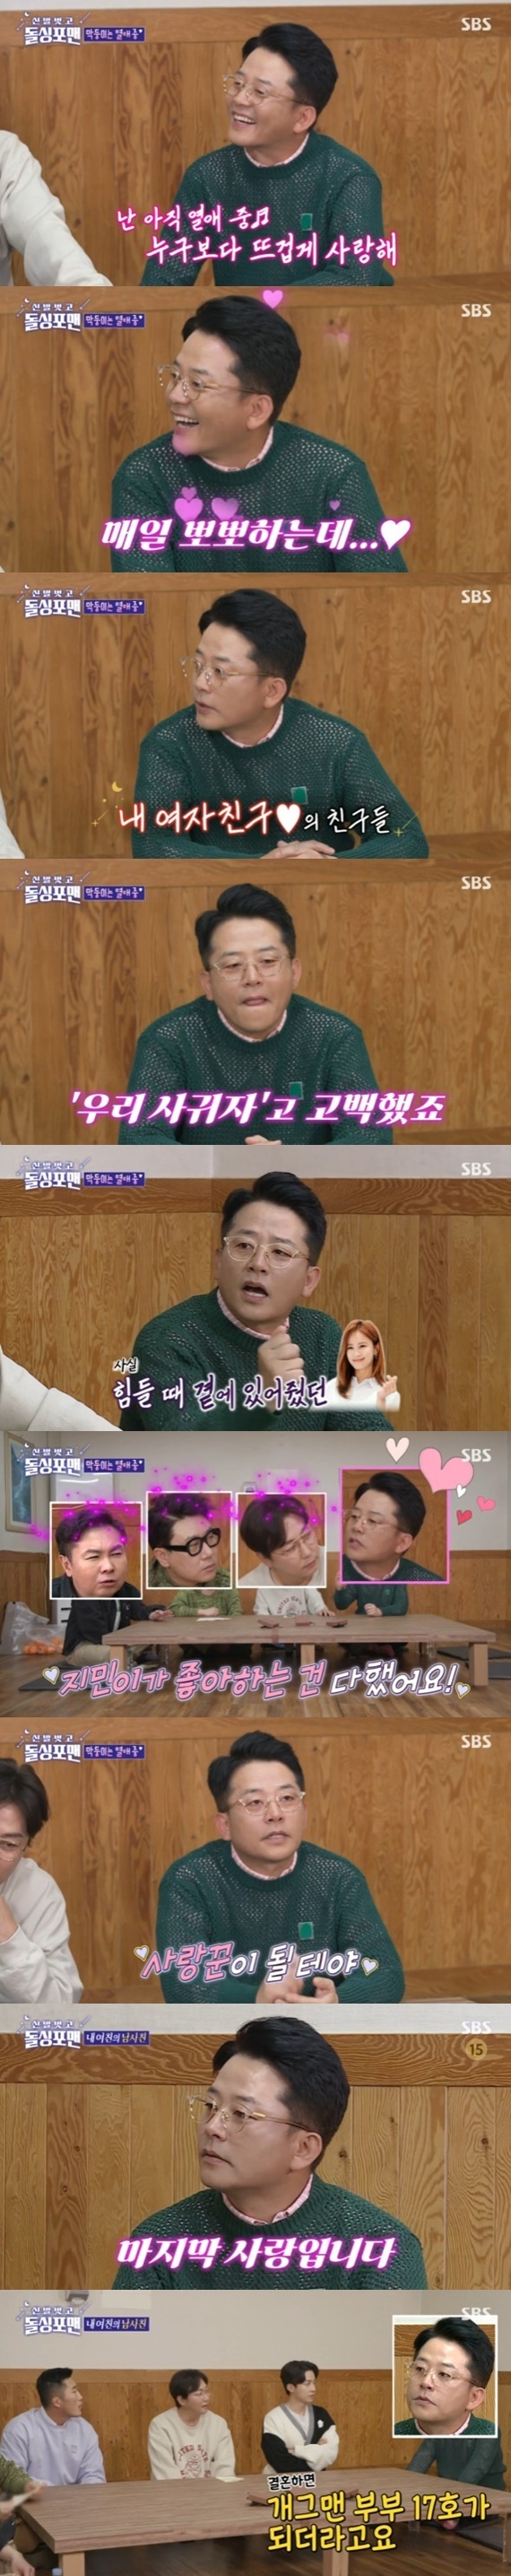 Seoul = = Comedian Kim Jun-ho reveals his devotion to Kim Jimin, causing jealousy of Take off your shoes and dolsing foreman.In the SBS entertainment program Take off your shoes and dolsing foreman (hereinafter referred to as Dolsing Foreman), which was broadcast on the afternoon of the 19th, the story of Kim Jun-ho, who reported his love affair with Kim Jimin, was included.Another pair of gag-type top star couples were born on the 3rd, officially acknowledging that Kim Jun-ho, the youngest of the rock jae-hun Im Won-hee Lee Sang-min Kim Jun-ho, is a lover with the Comedian junior Kim Jimin.So, Dolsing Forman attracted attention with the appearance of Kim Jun-ho, who is in love, and the appearance of Jang-has How much I will goKim Jun-ho responded with Bens devotion and laughed.Kim Jun-ho said he felt frustrated about his devotion to Kim Jimin.Then Tak Jae-hun said, I will do it without a kissing circle. Kim Jun-ho confessed, When did you kiss me, I said, Moy Yat kissing me.Kim Jun-ho said he would arrange a blind date with friends with Kim Jimin and said, My friends are friends.Kim Jun-ho said, I liked it like a thumb, but I talked about it as a man. Kim Jimin and his juniors became lovers.Kim Jun-ho said, Jimin has remained loyal every time our office is difficult, she seemed to be a woman, she did everything Jimin liked, she almost stopped the beginning of the year before she even started dating, and she started buying clothes.Kim Jun-ho then advised the single, Dolsing Forman, saying, It is not a prudent thing, something must change, not in this state.In addition, Kim Jun-ho said, Jimin gave me a meal in the morning with a delivery app, and I am proud to be able to do an event, so I want to learn the piano.In addition, Kim Jun-ho expressed Kim Jimin as last love in front of Hur Kyung-hwan and Kim Dong-hyun, who appeared as guests, and attracted attention with the dream of Comedian couple 17.On the same day, Dolsing Forman joined the group WINNER (Kang Seung-yoon Kim Jin-woo Song Min-ho Lee Seung-hoon) following last week.Dolsing Forman, who argued for parallel theory with WINNER, was pleasant with the appearance of each team, Kim Jin-woo and Im Won-hee, the youngest and leader of each team, Kang Seung-yoon and Kim Jun-ho.Kang Seung-yoon and Tak Jae-hun of Wonkiebushim played a high-pitched confrontation with Shes Gone.Tak Jae-hun tongued Kang Seung-yoon, who digested the perfect four-speed treble, and eventually caused a laugh by lying down in a high-pitched way.On the other hand, SBS Take off your shoes and dolsing foreman is a talk show of twisted stones that guarantees 200% of guest satisfaction from the story of love story to realistic advice.